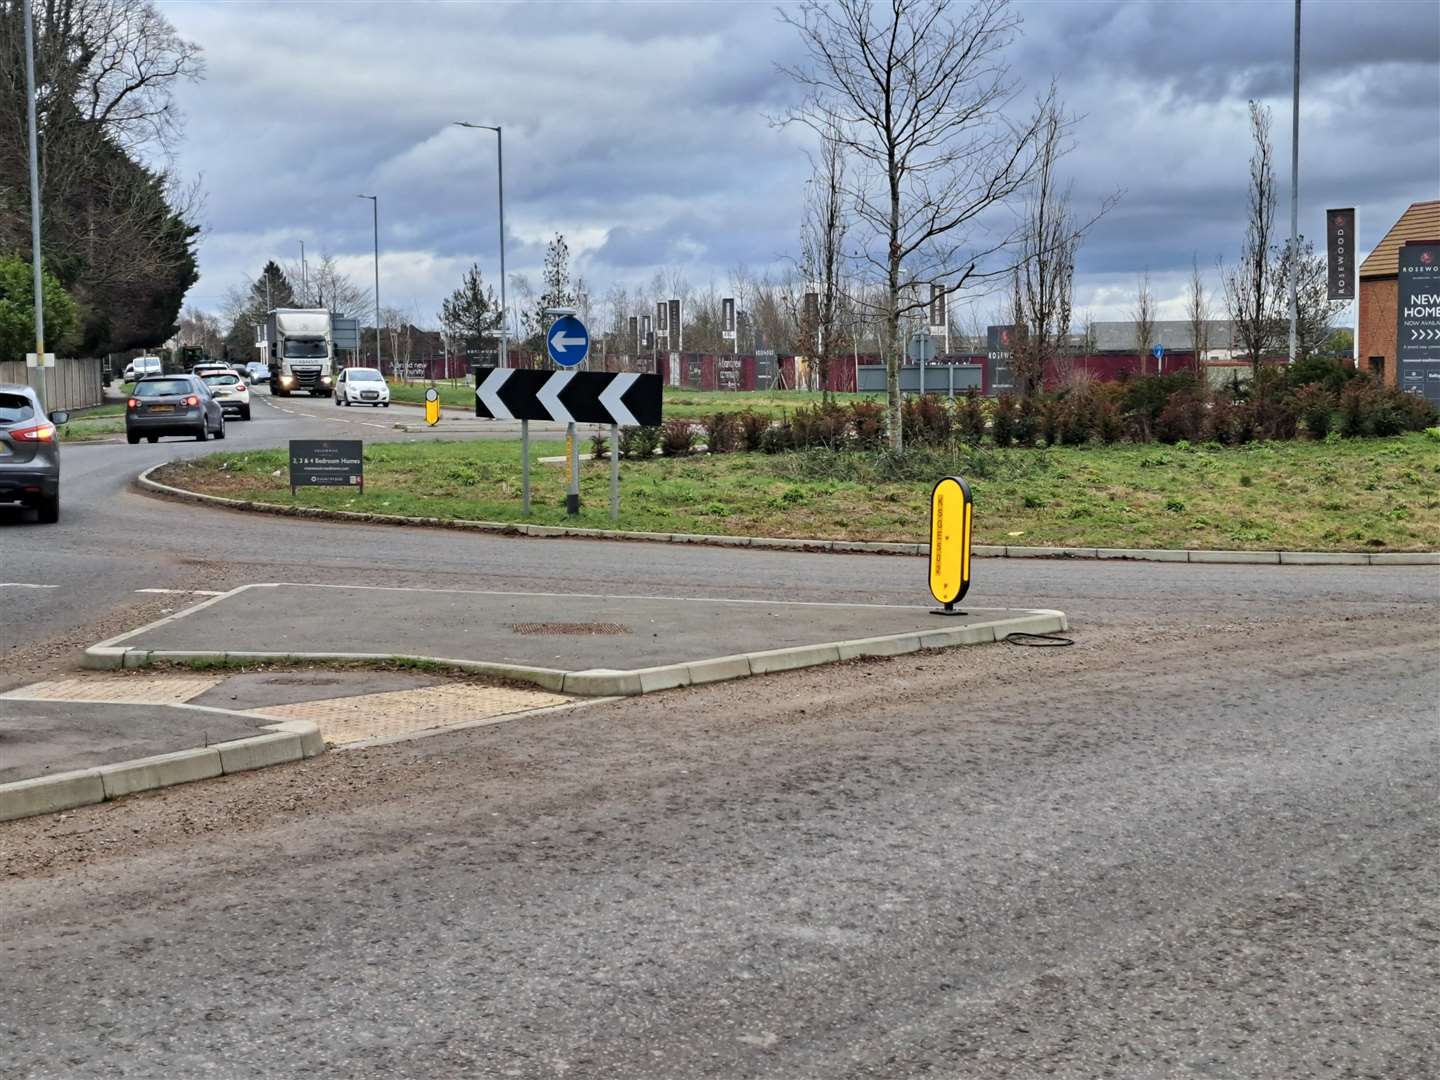 The roundabout on Sutton Road giving access to the Rosewood development, down for a 30mph limit